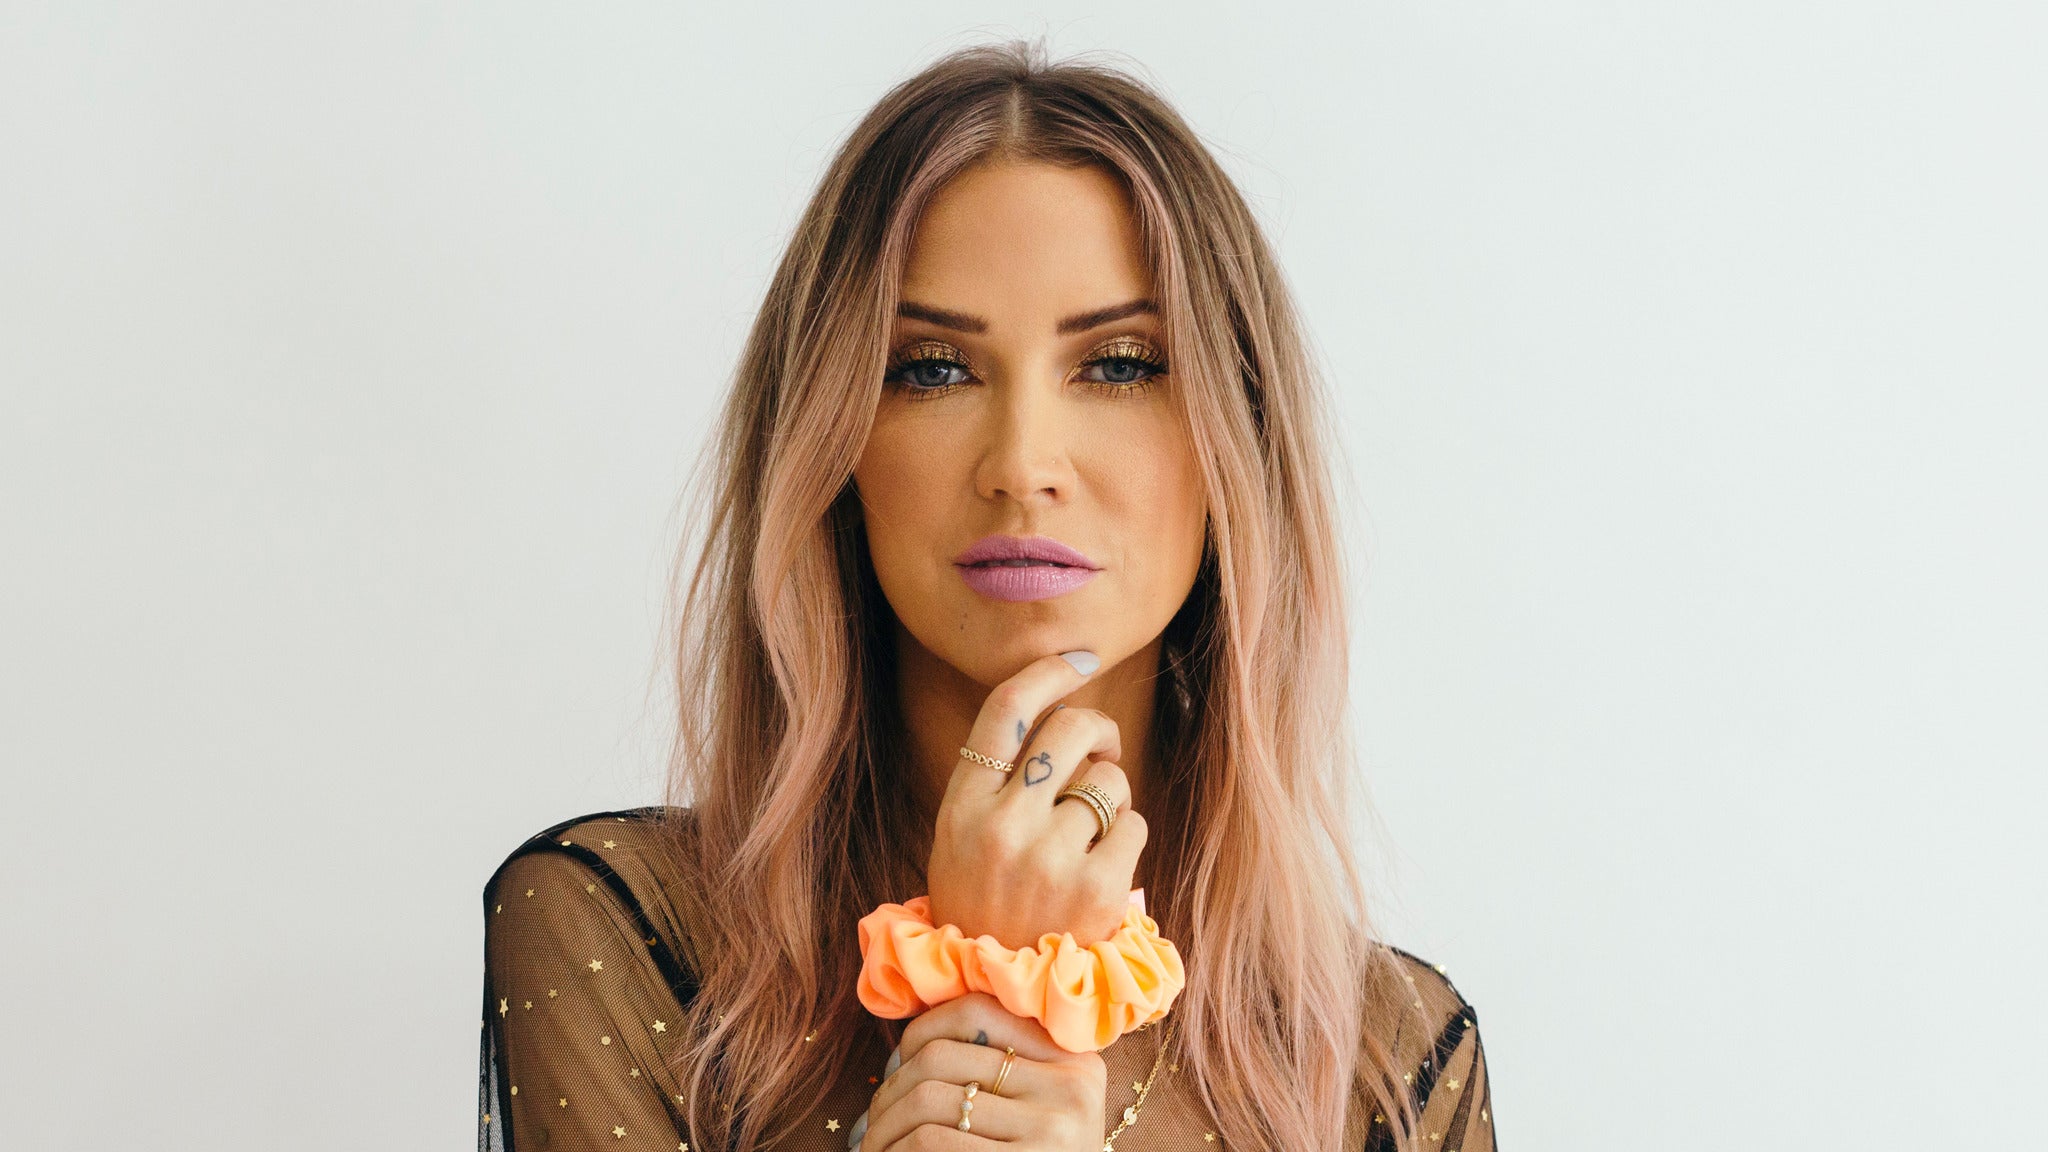 Kaitlyn Bristowe: KB Fall Crawl Tour in Vancouver event information